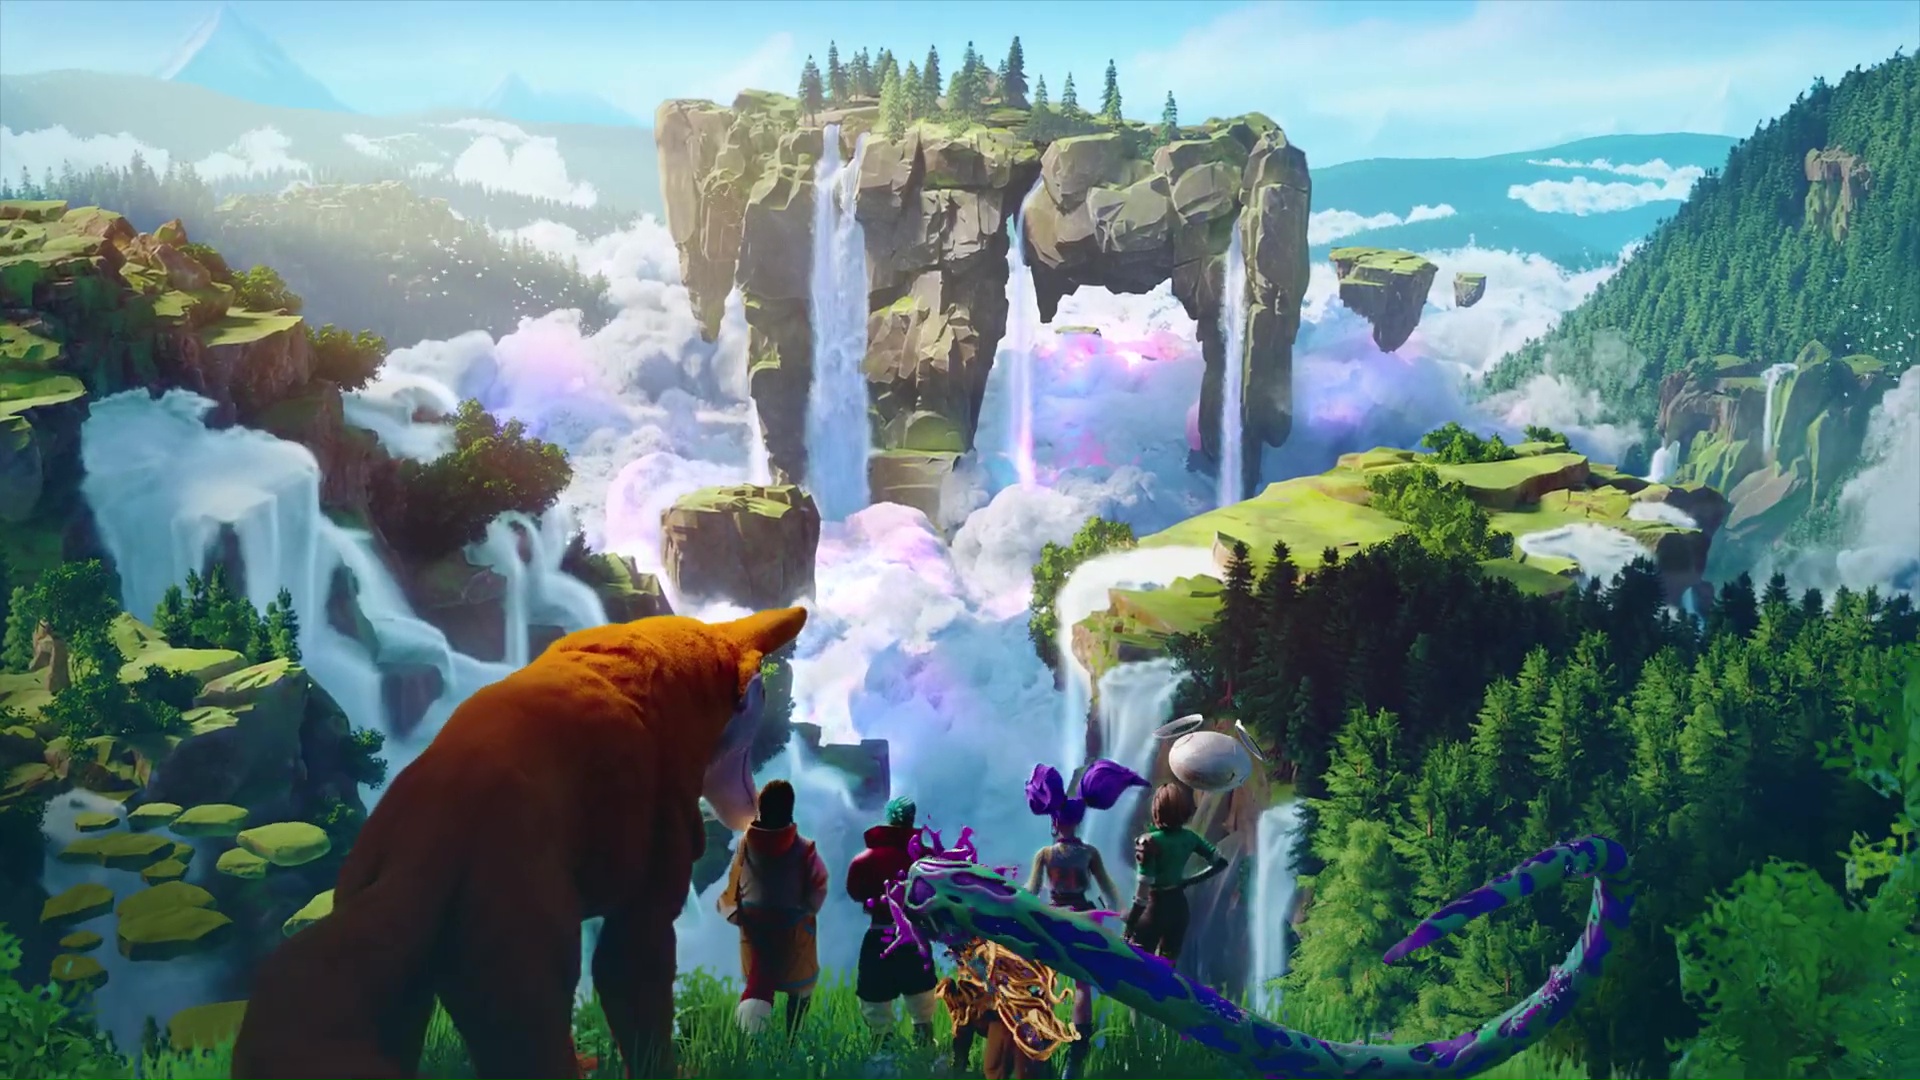 four player characters and their animal-like companions stand atop a cliff, gazing out at a fantastical landscape shrouded in clouds and glistening with waterfalls